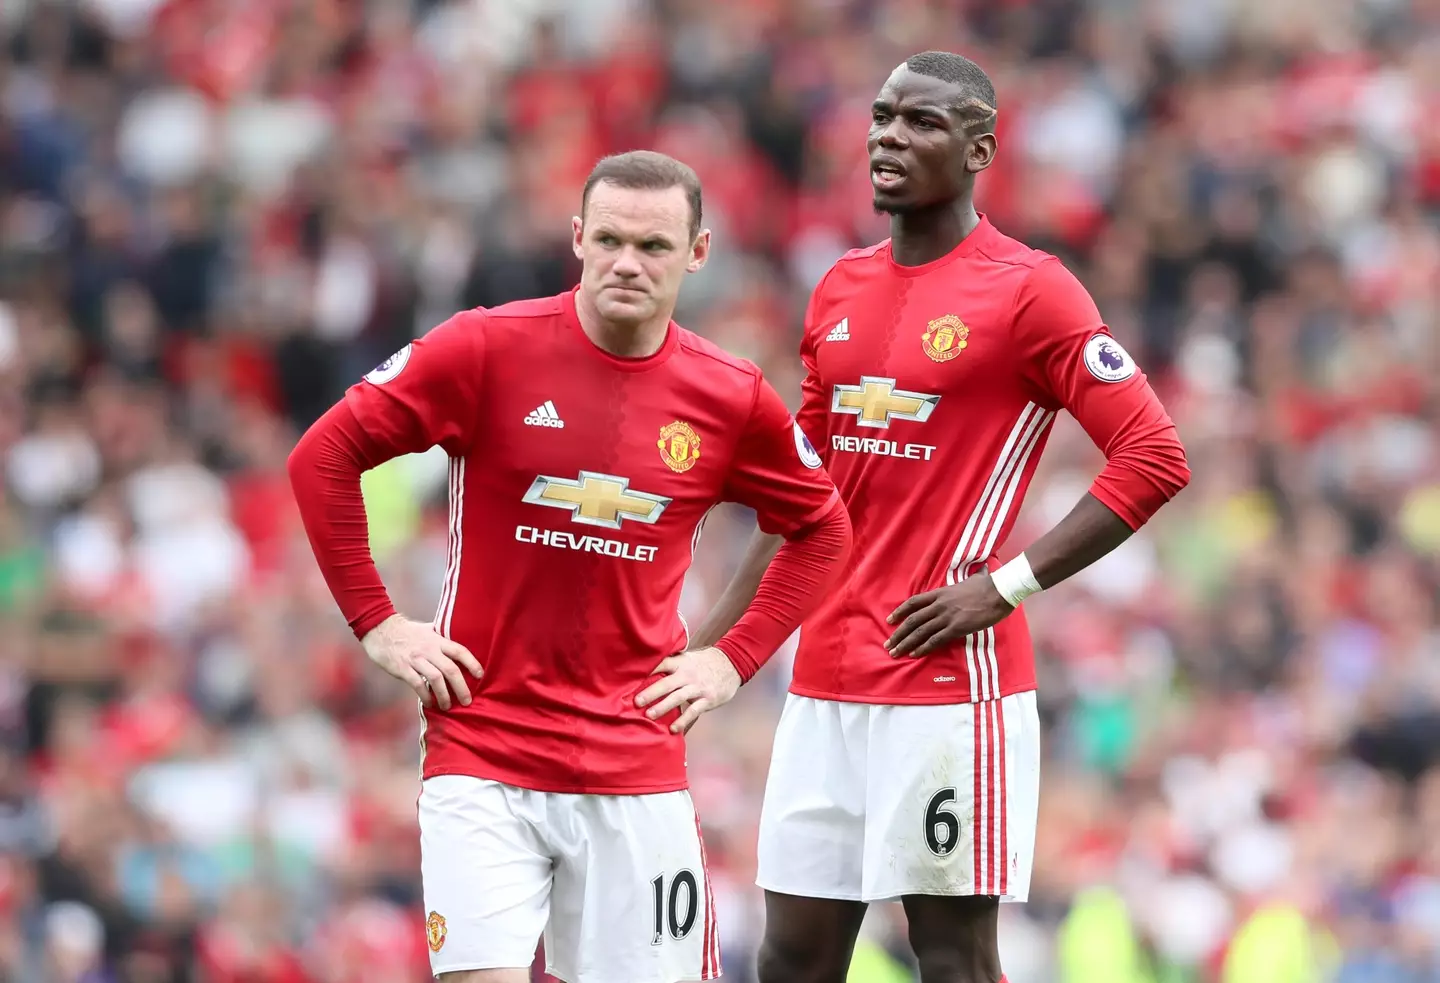 Rooney and Pogba won the Carabao Cup and Europa League together. (Image